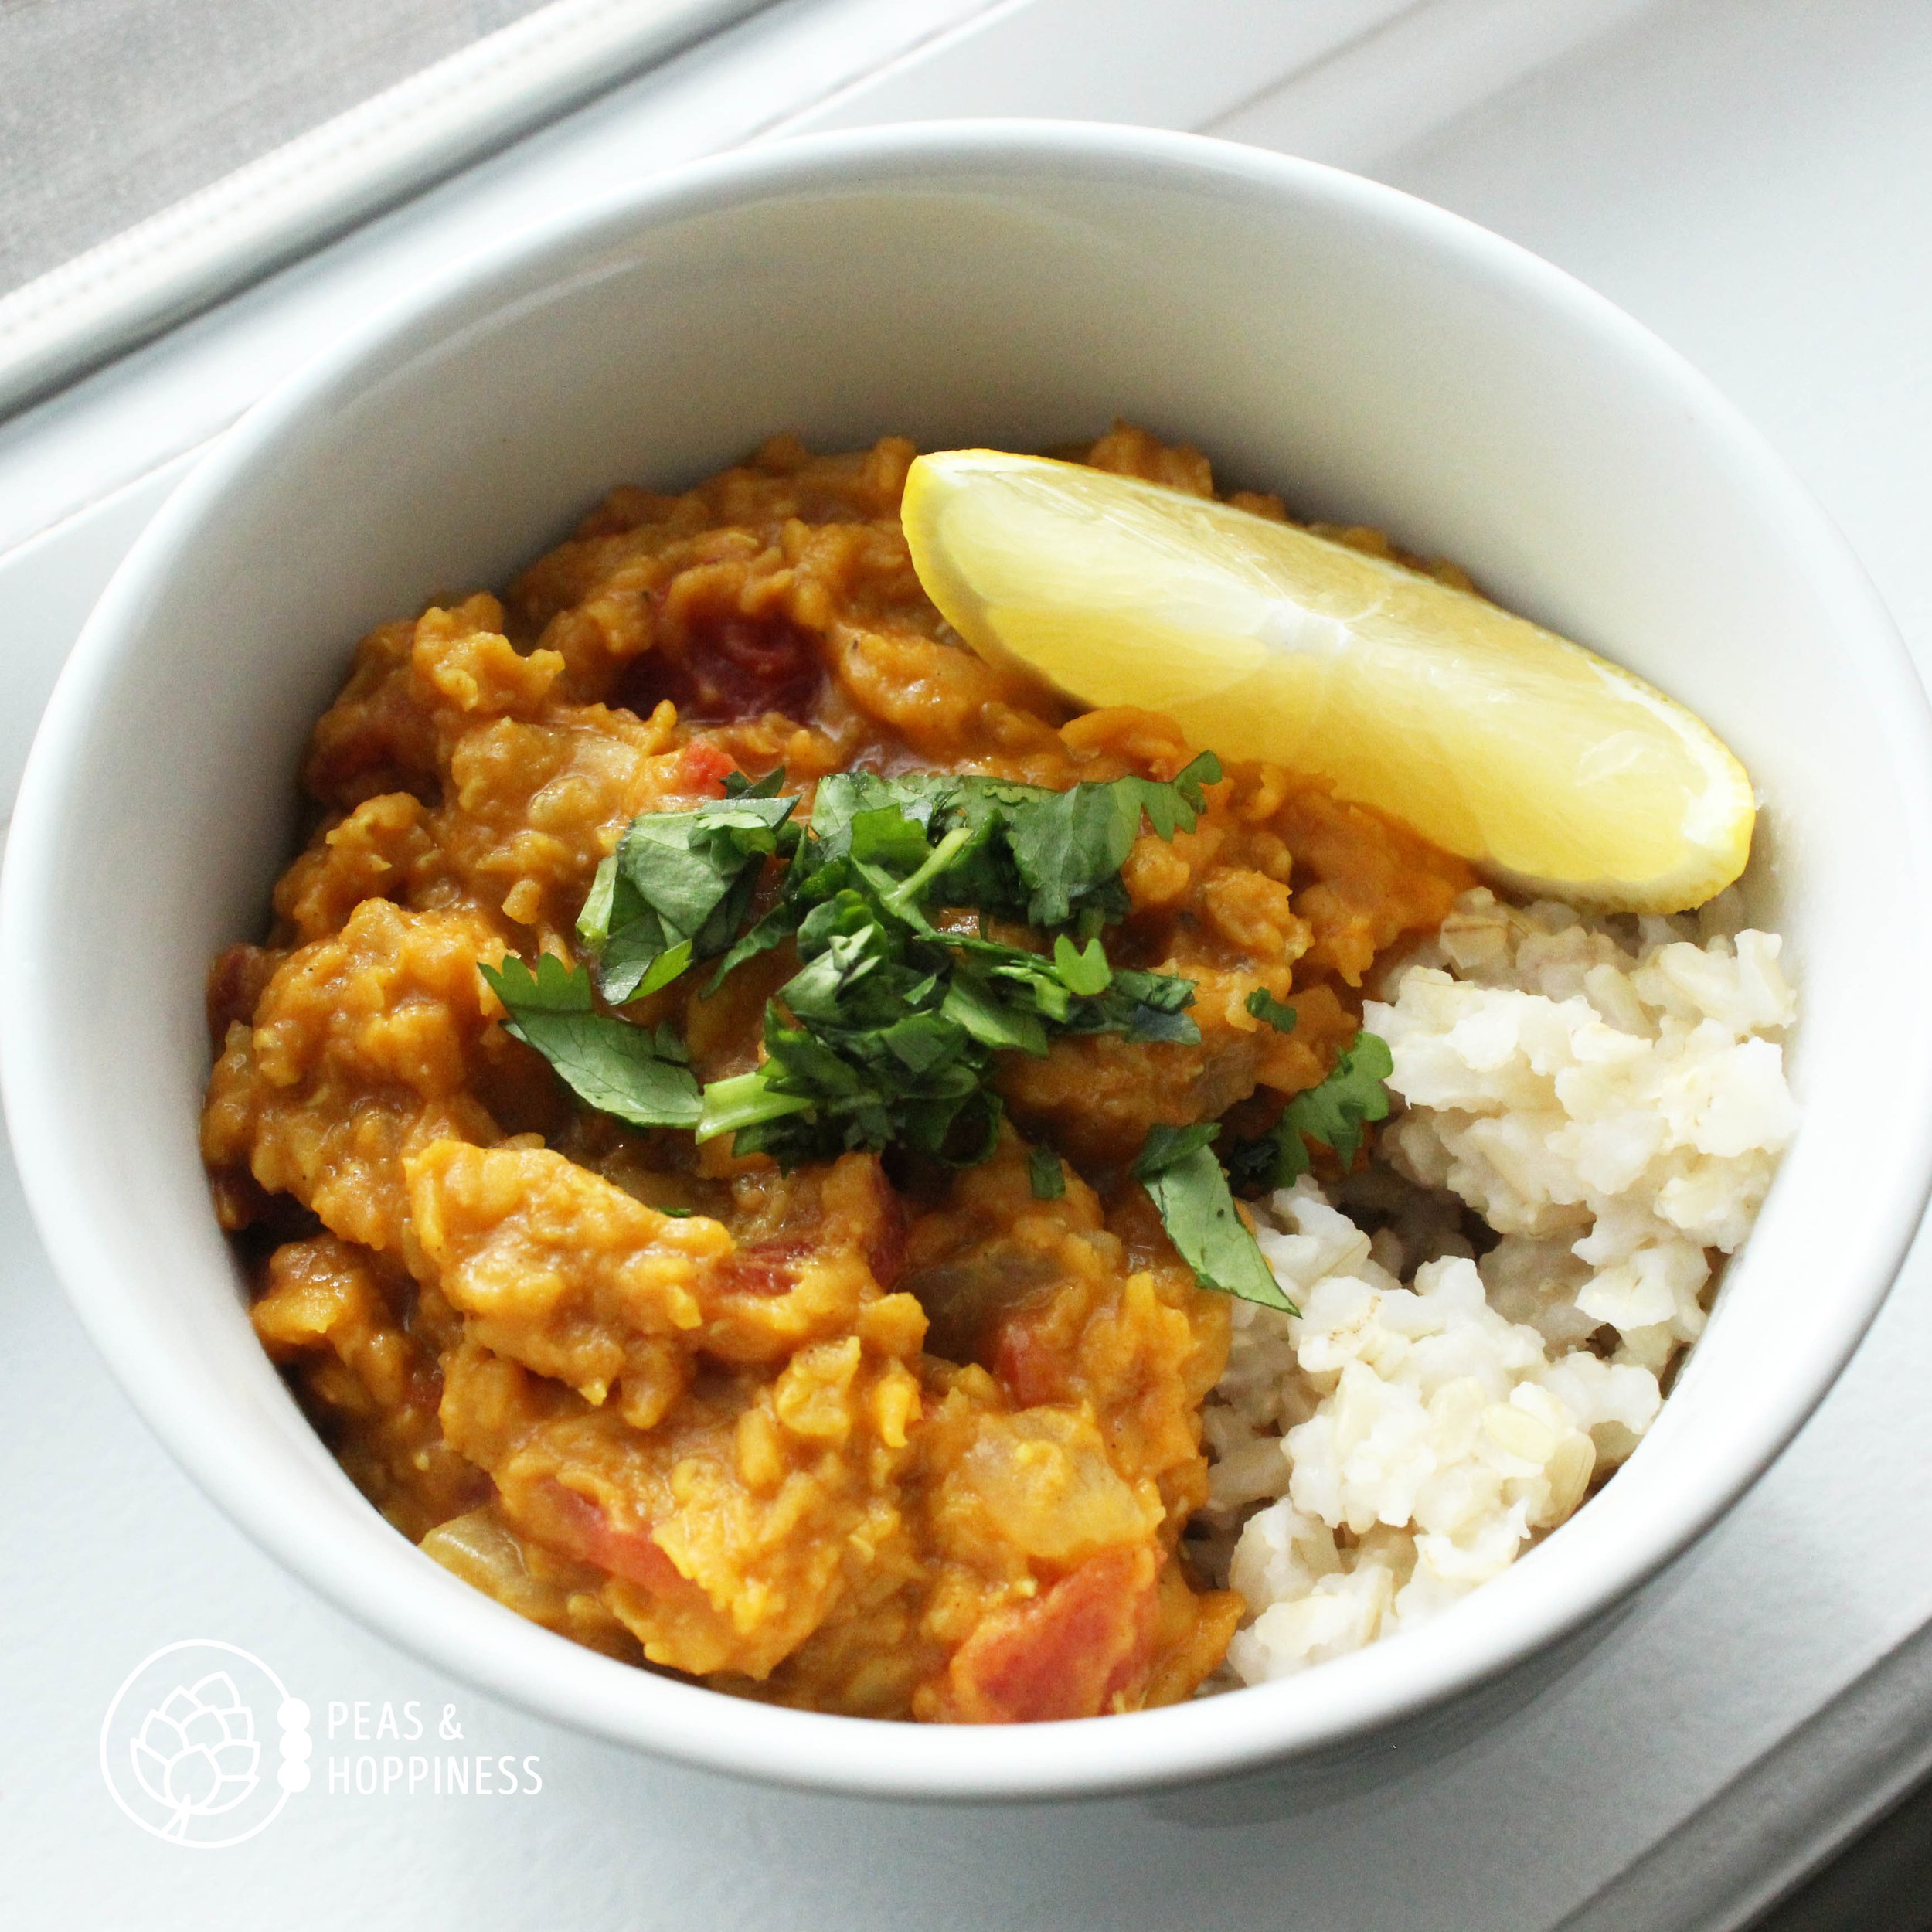 Bowl of Red Lentil Dahl with Brown Rice, Recipe from the Peas & Hoppy Meal Guides